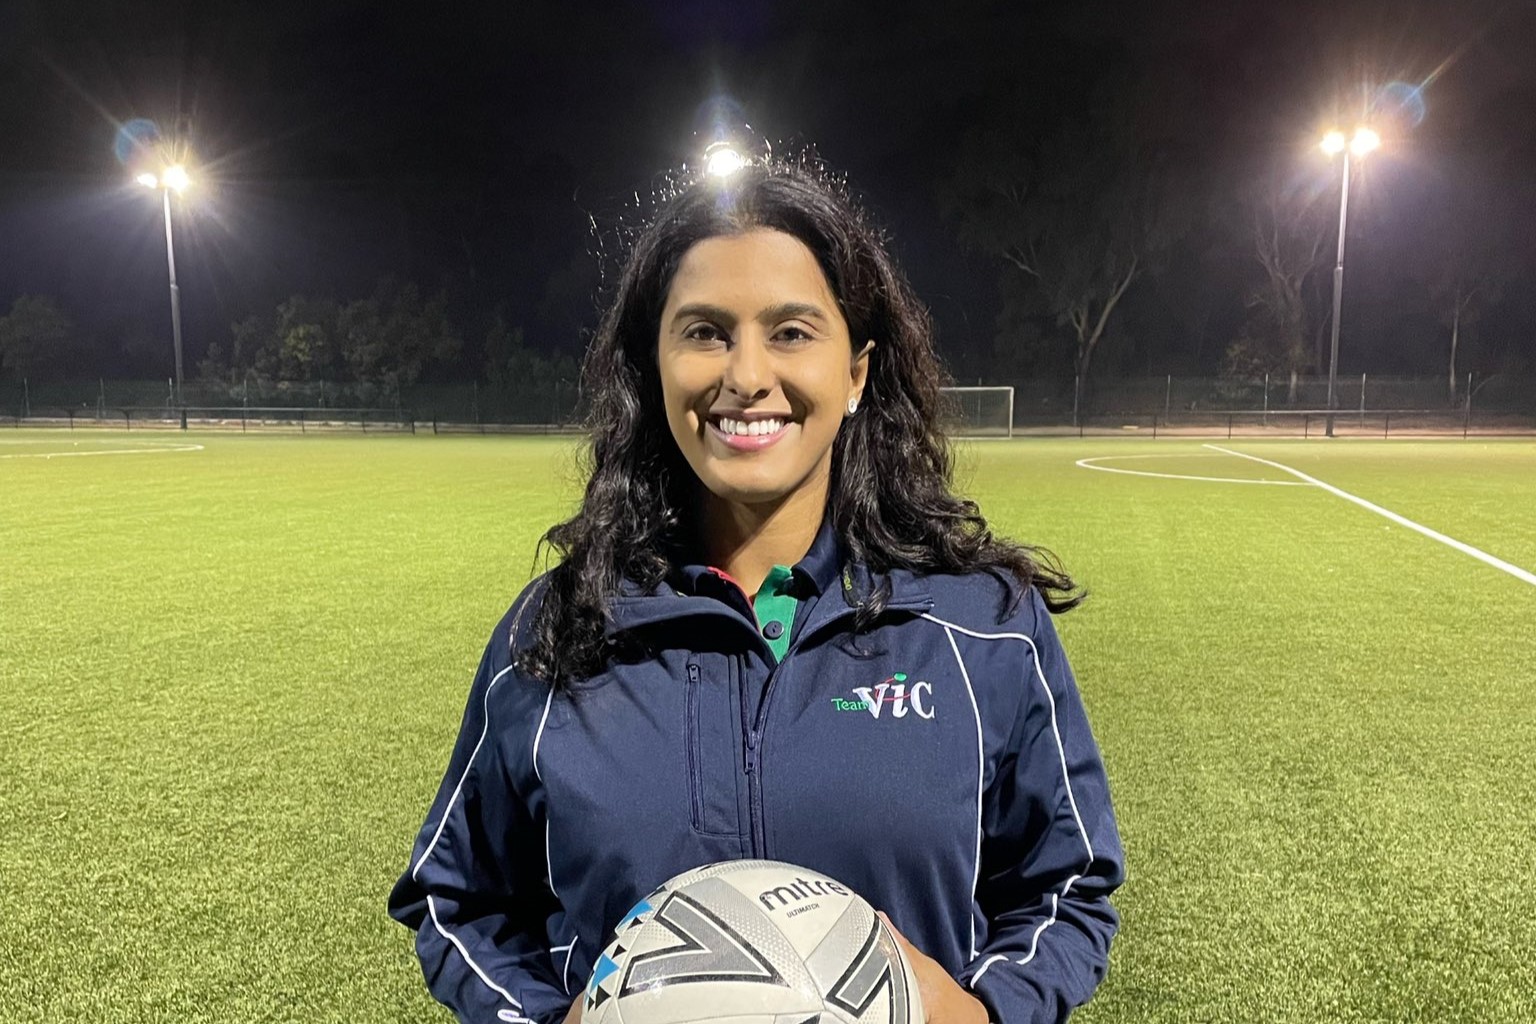 Aish Ravi in her role as state team coach for Victoria standing on a football field holding a soccer ball